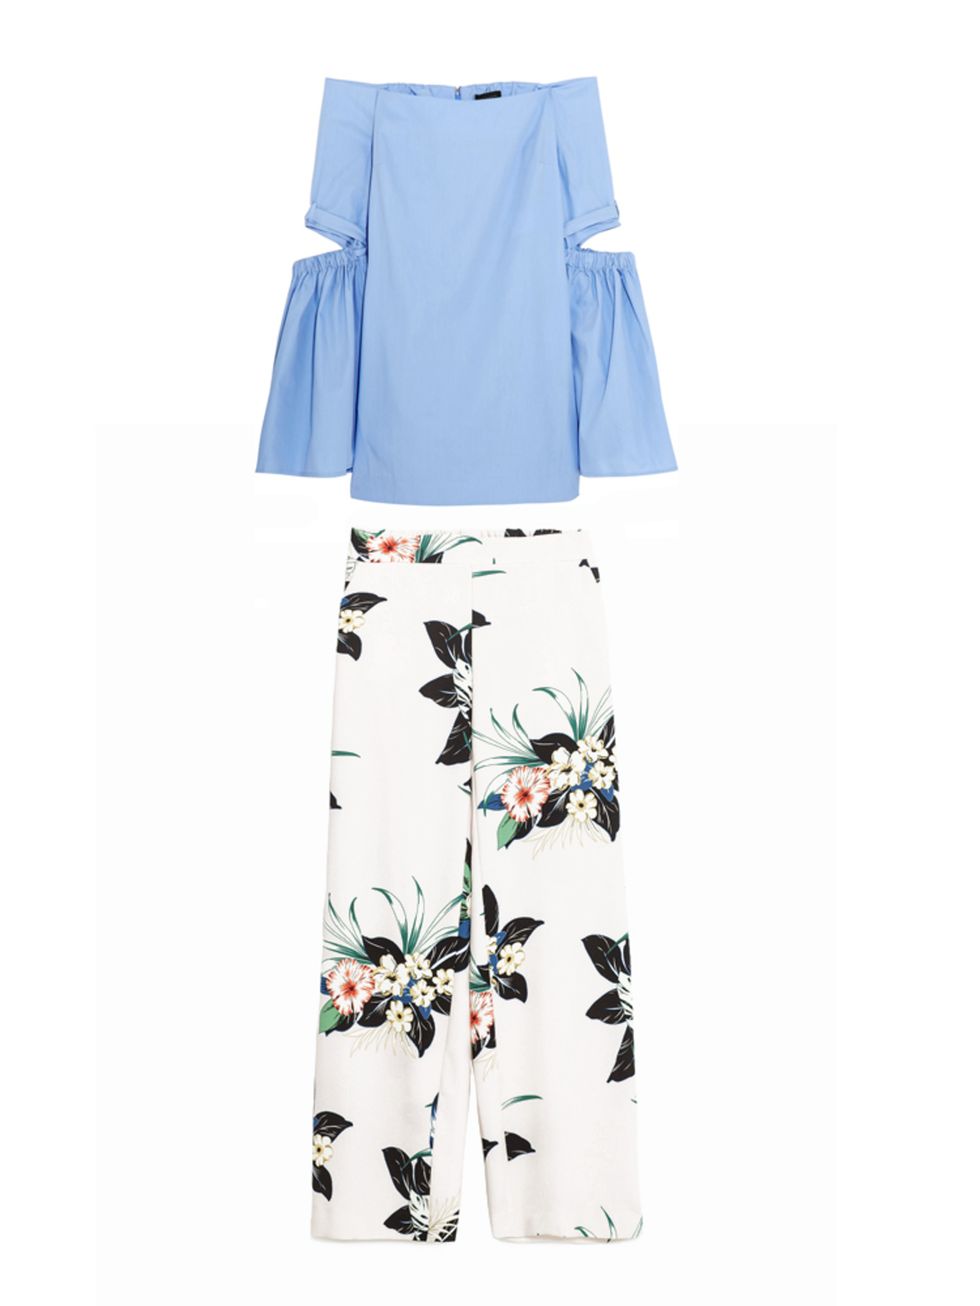 <p>Cut out top with fluted sleeves, £470, <a href="https://www.net-a-porter.com/gb/en/product/678856/Ellery/cyril-off-the-shoulder-cutout-cotton-poplin-top" target="_blank">Ellery</a></p>

<p>Flroal print trousers, £29.99, <a href="http://www.zara.com/uk/